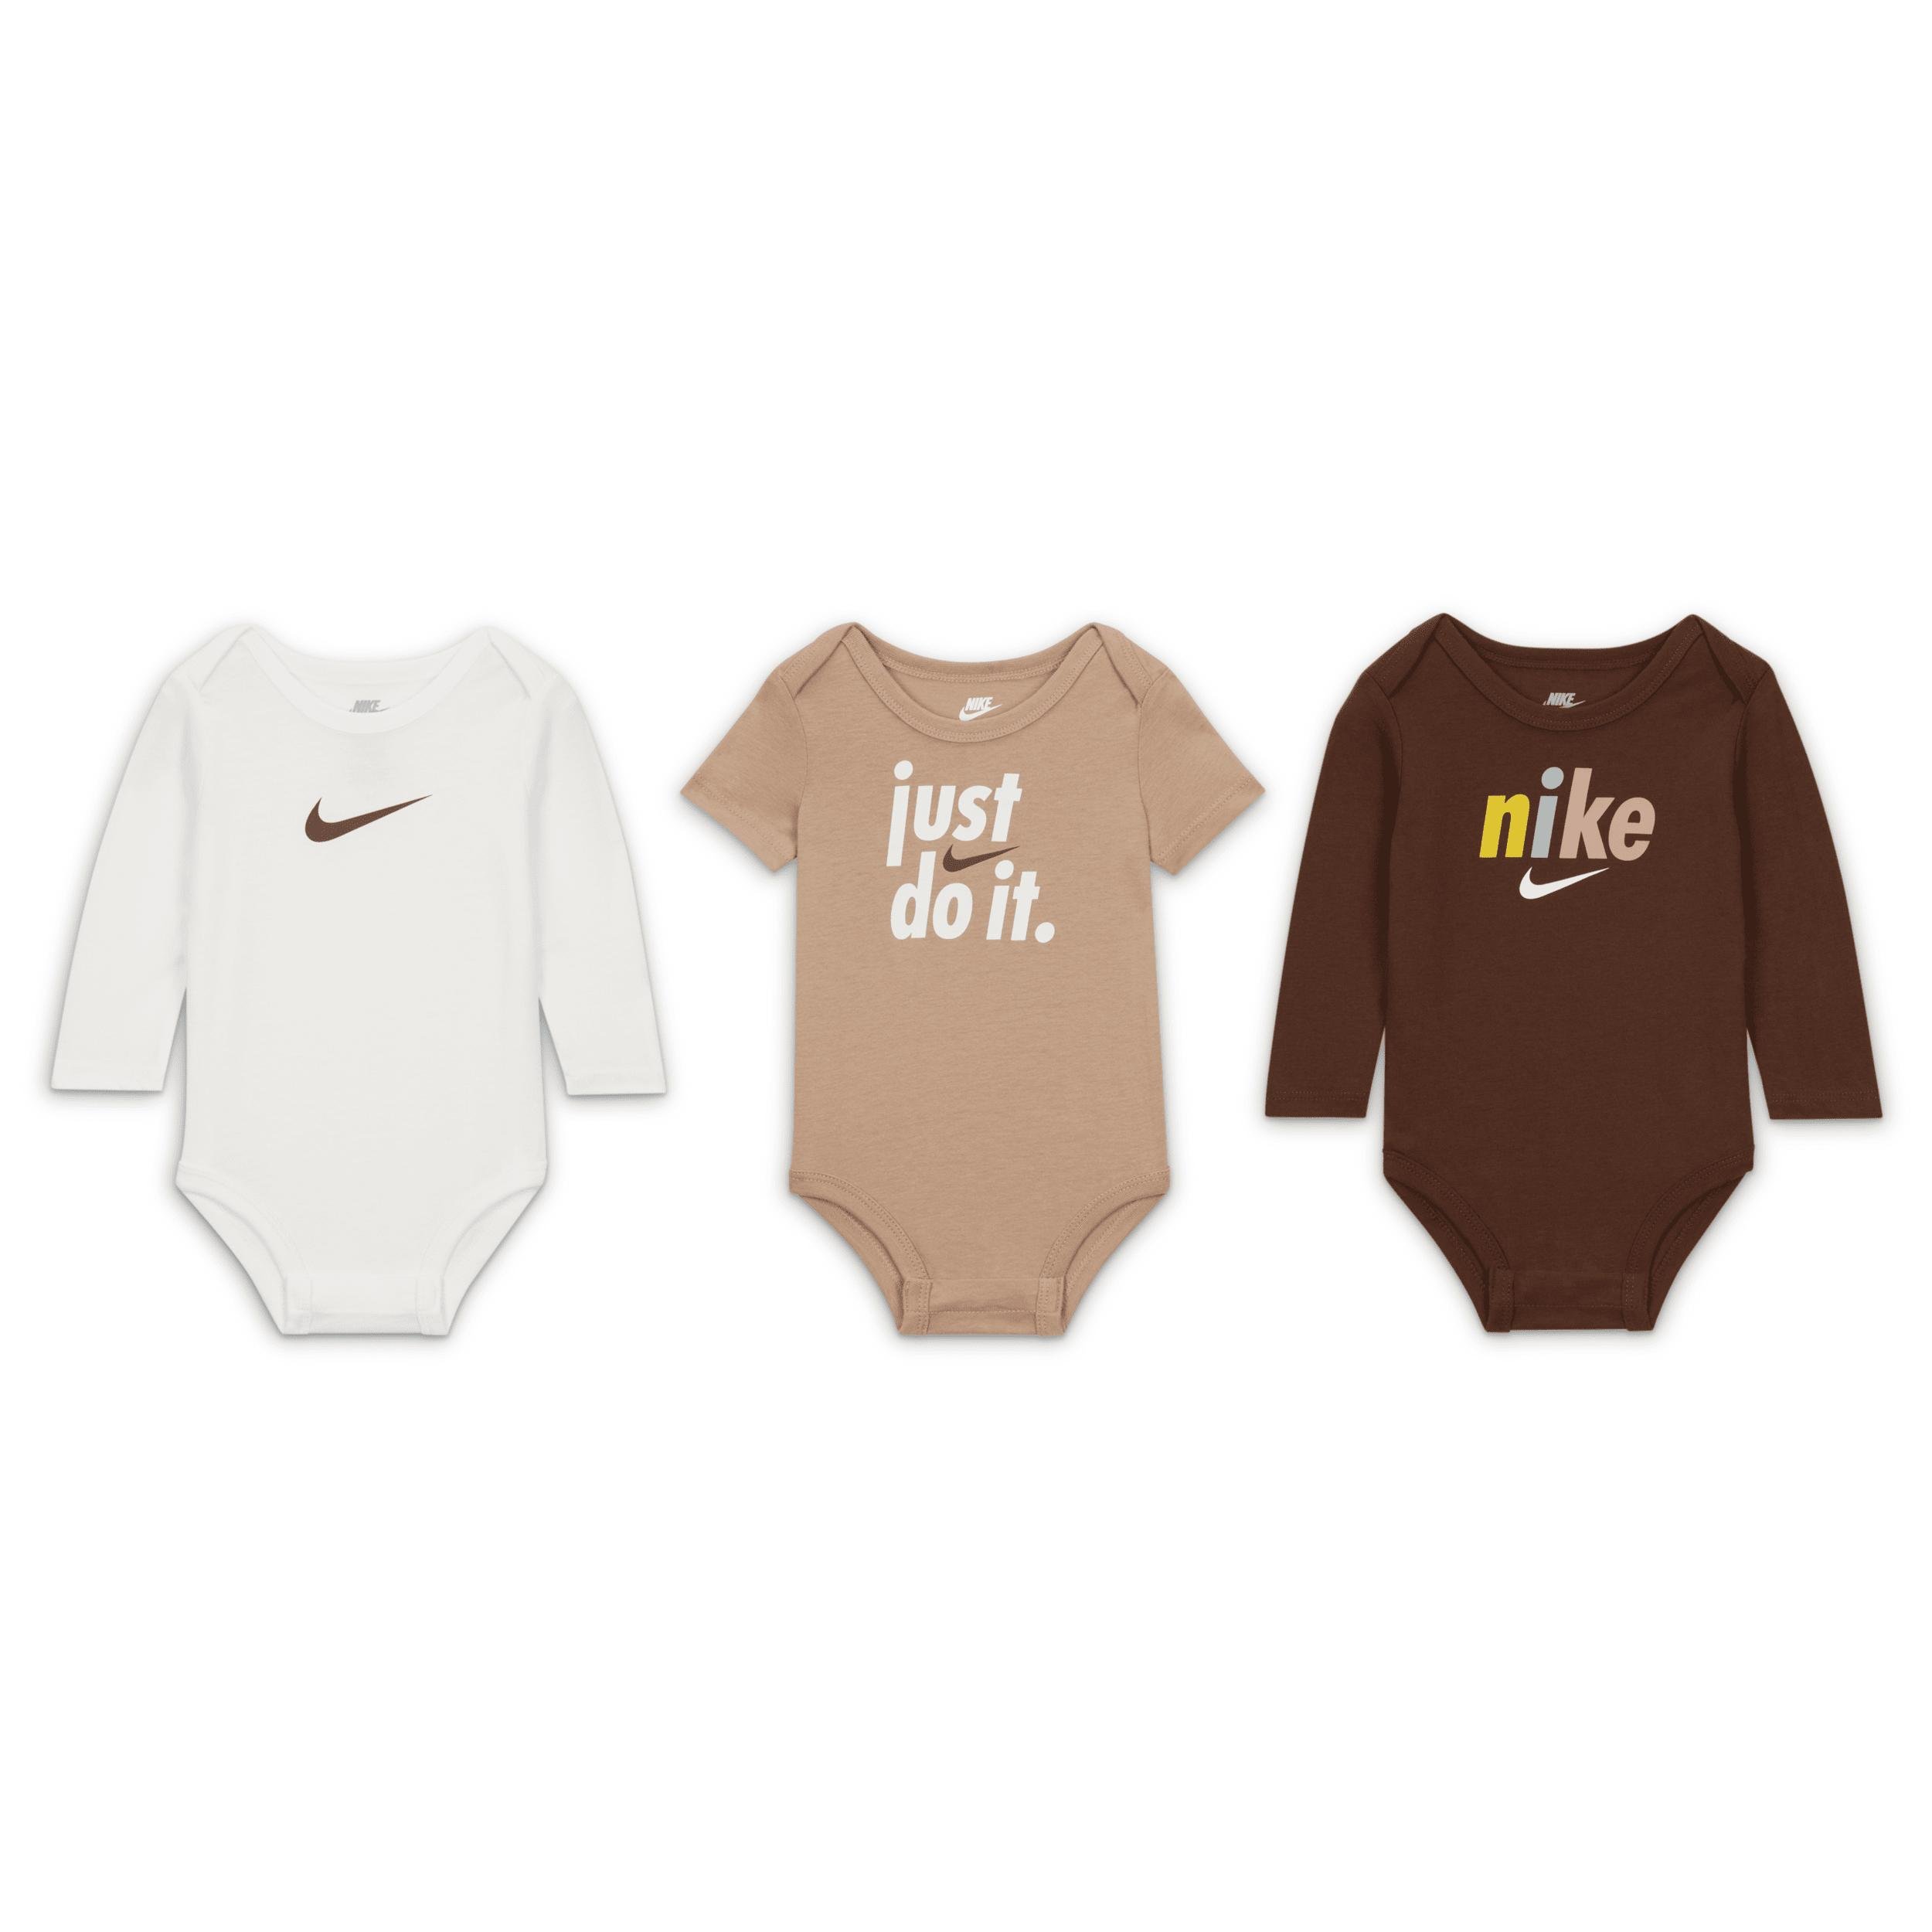 Nike E1D1 3-Pack Bodysuits Baby Bodysuit Pack by NIKE